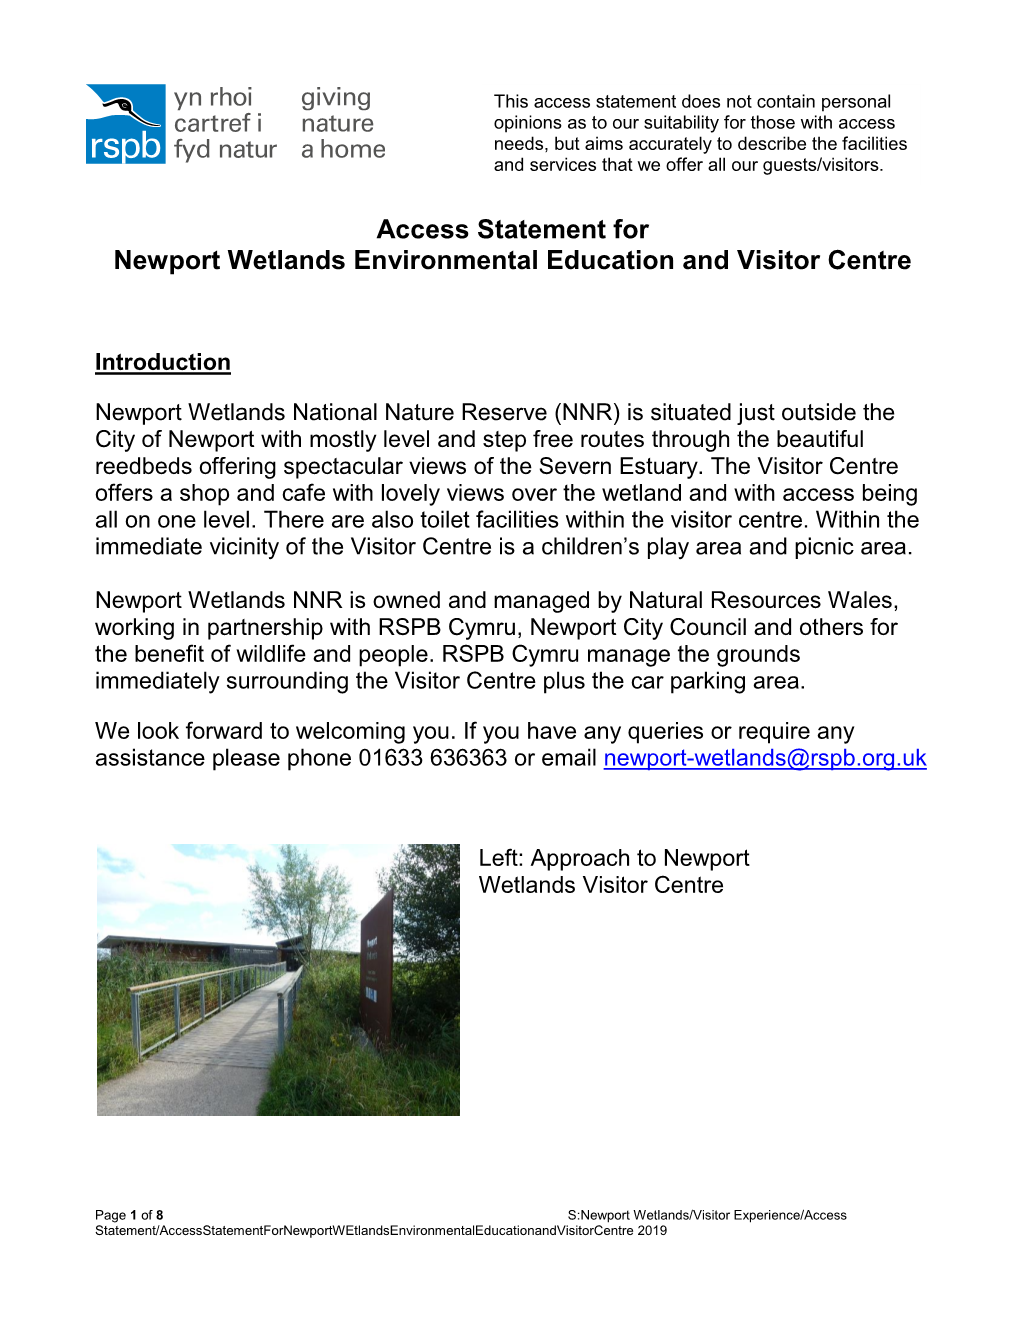 Access Statement for Newport Wetlands Environmental Education and Visitor Centre